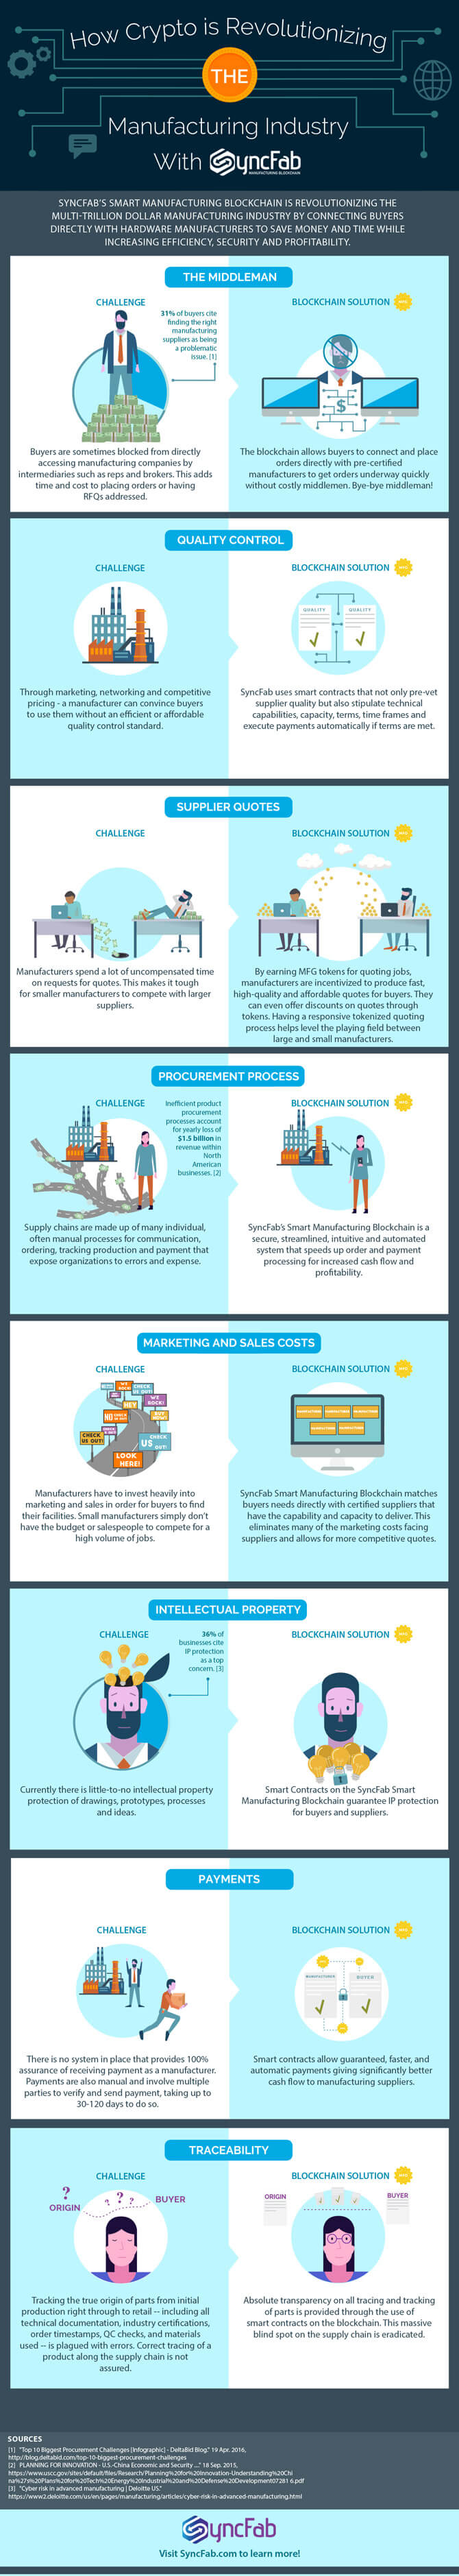 How Blockchain Technology is Revolutionizing the Manufacturing Industry [Infographics]